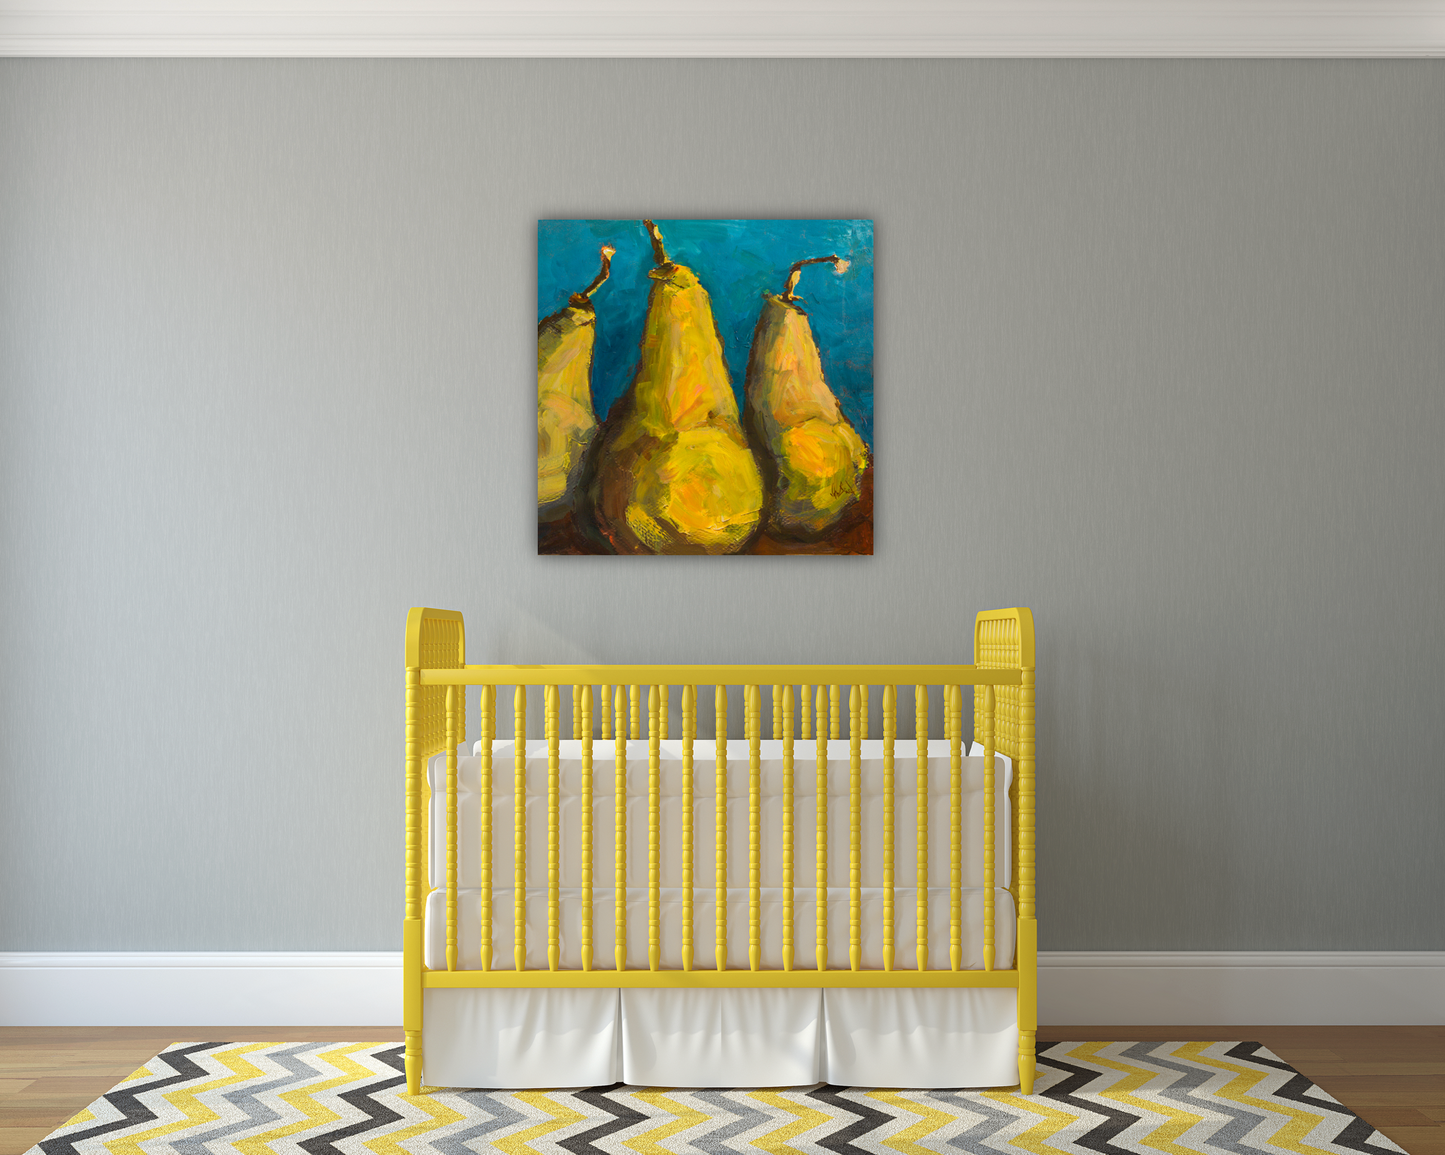 Pears with Teal Glossy Poster Print